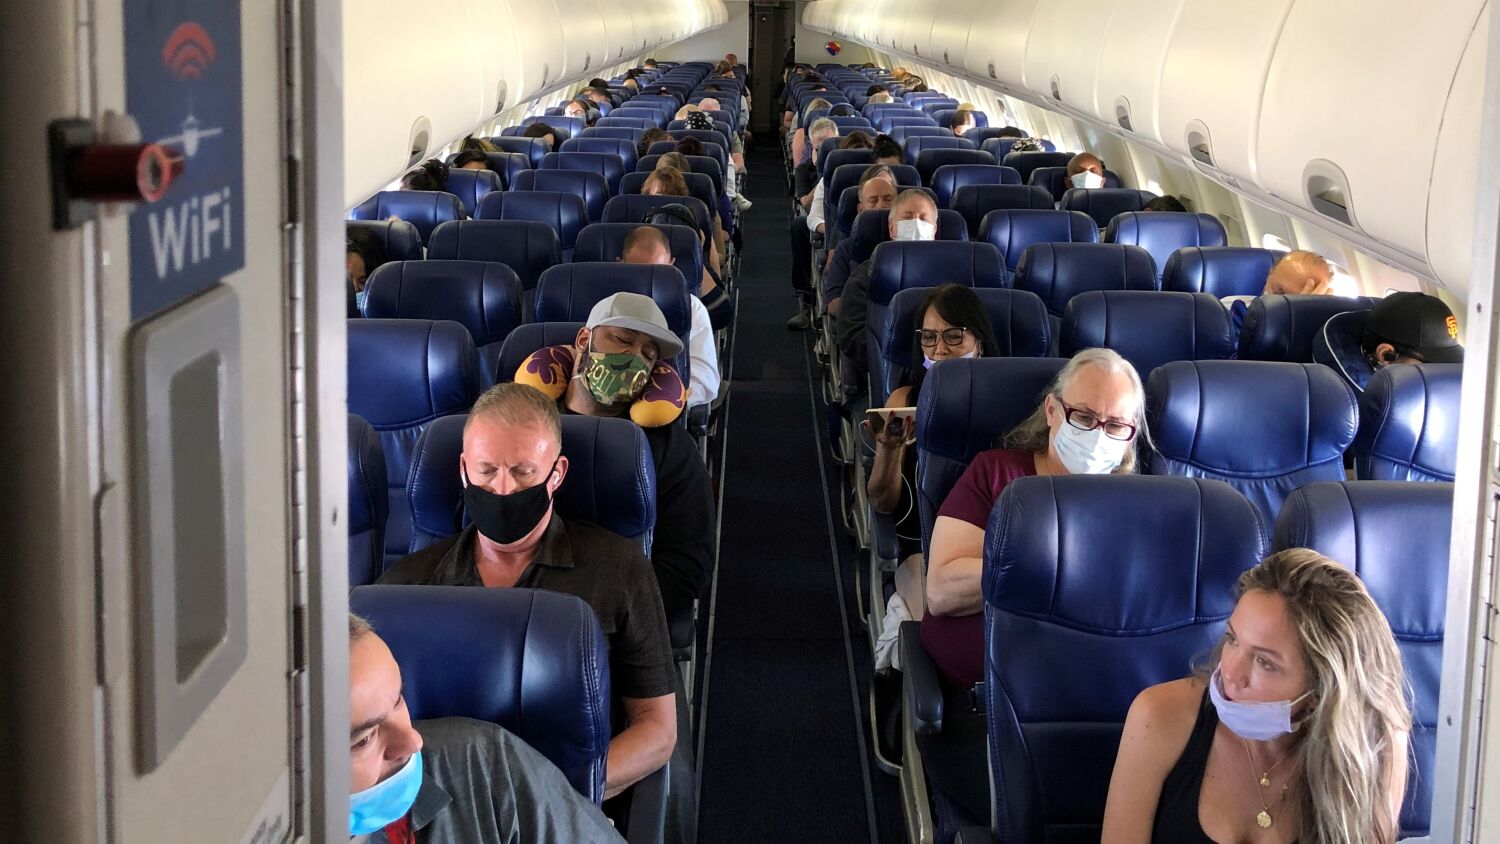 Congress addresses toxic gases in airplanes with a new bill

End-shutdown